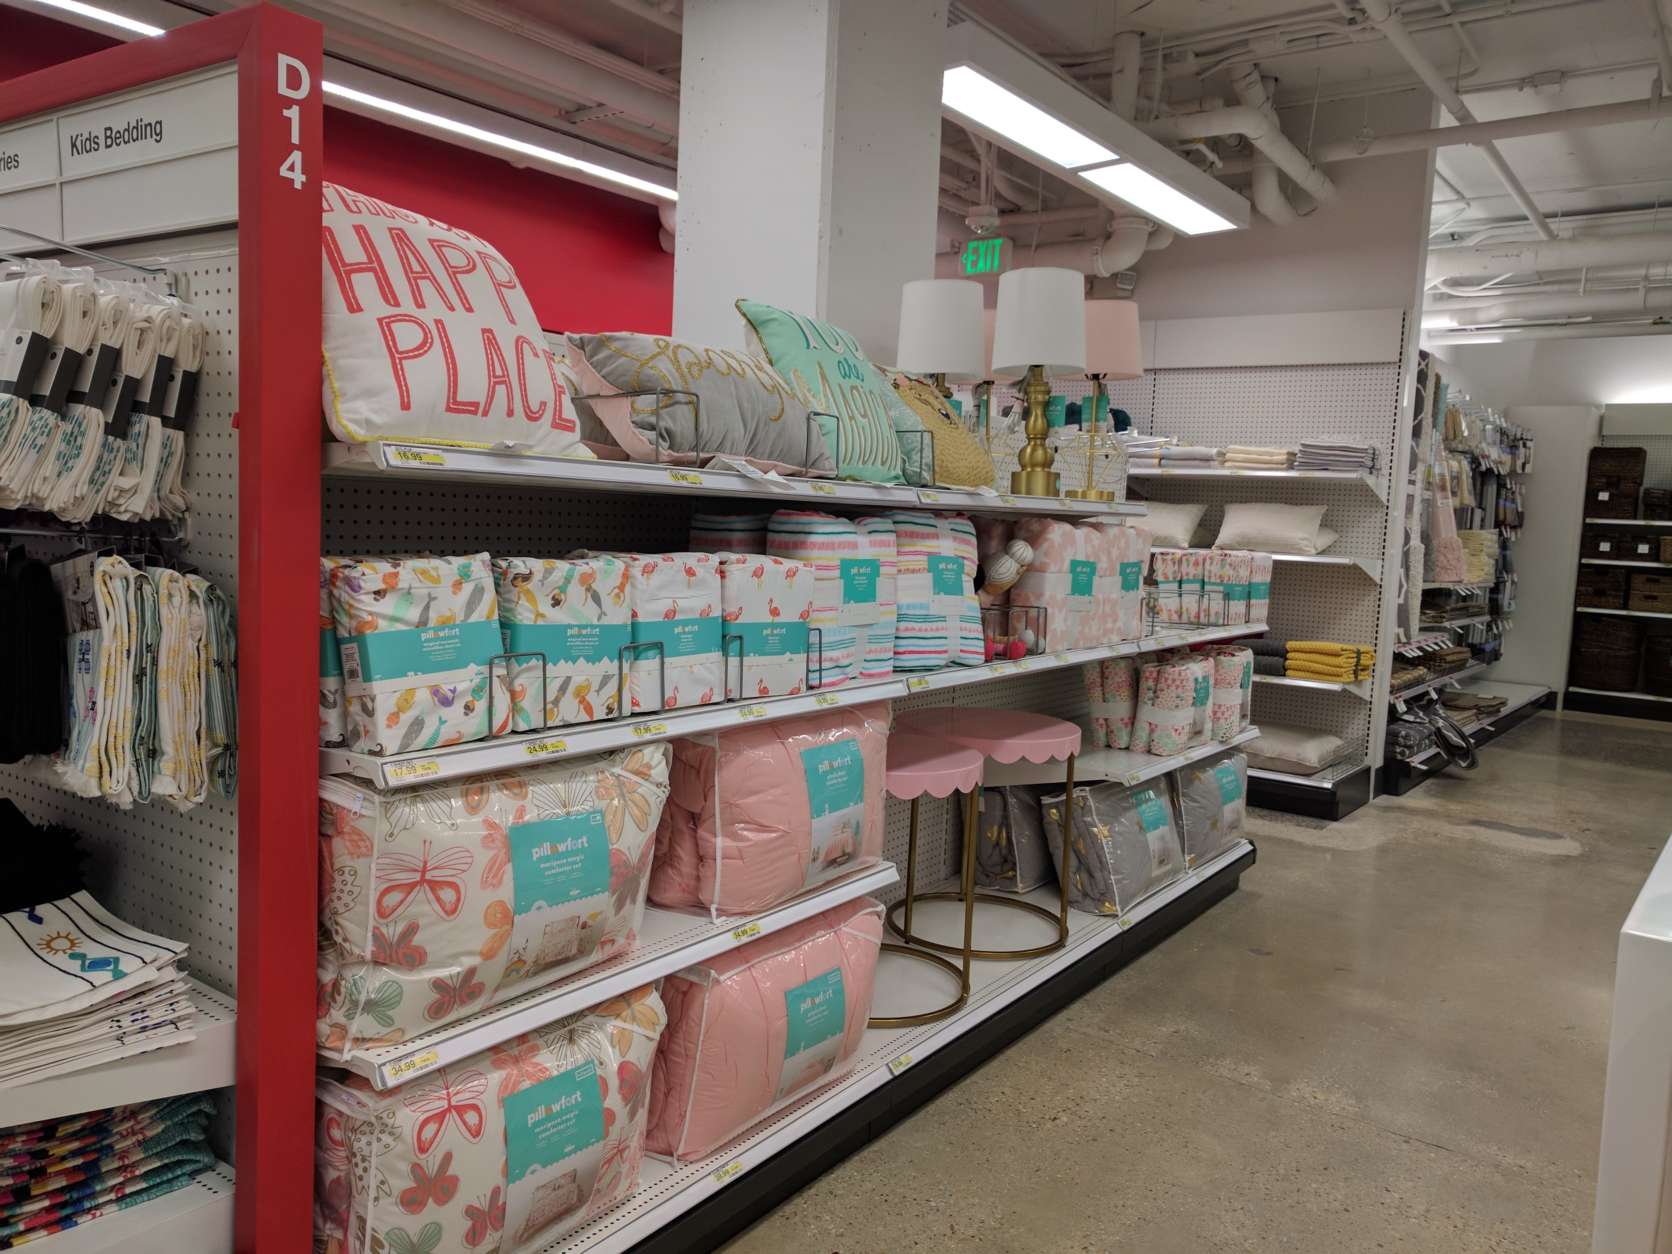 Although it's only about a third of the size of a typical Target, the store is loaded with items customers want. (WTOP/Michelle Basch)